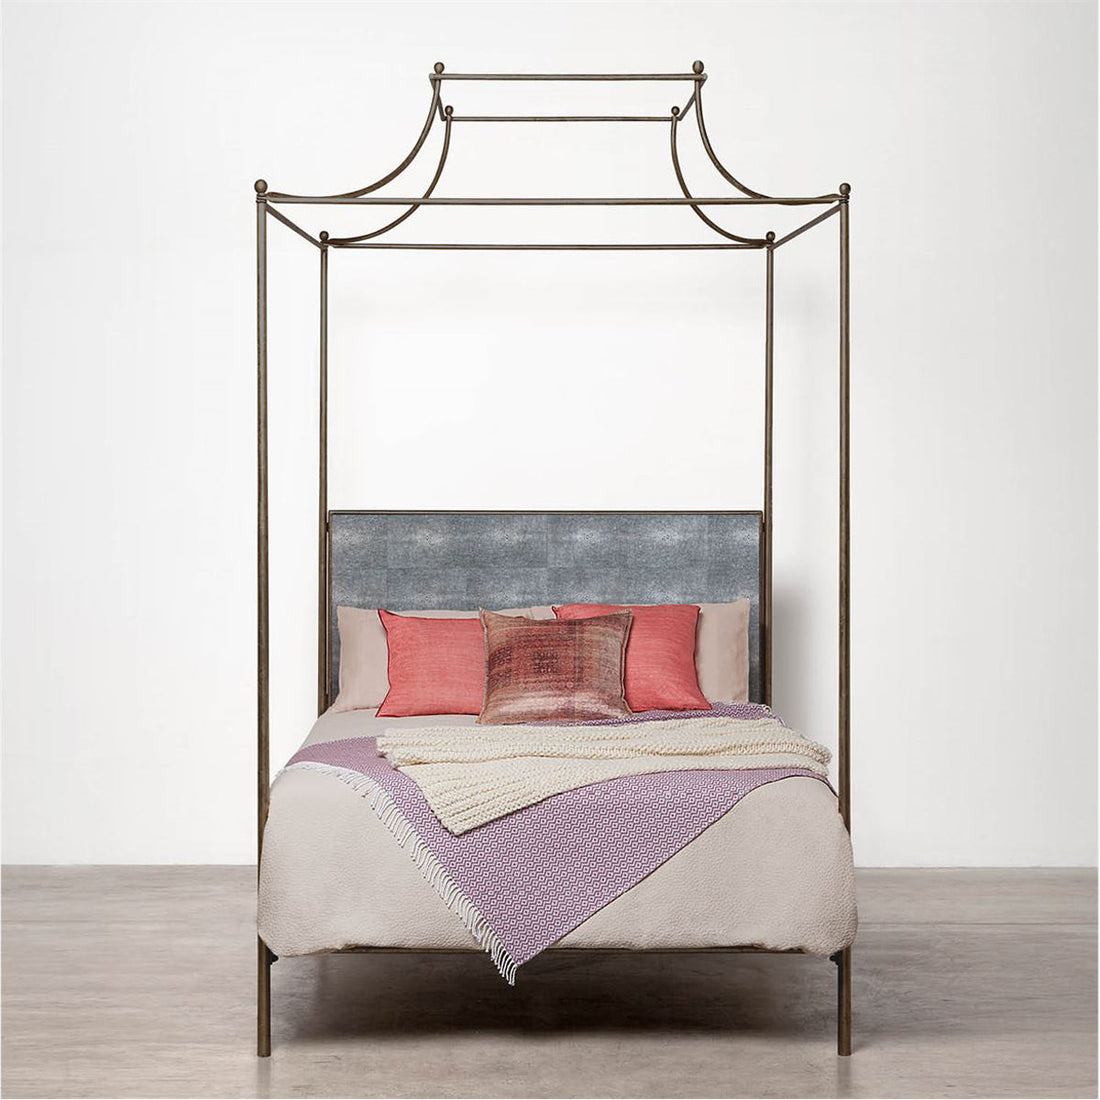 Made Goods Janelle Scalloped Iron Canopy Bed in Arno Fabric